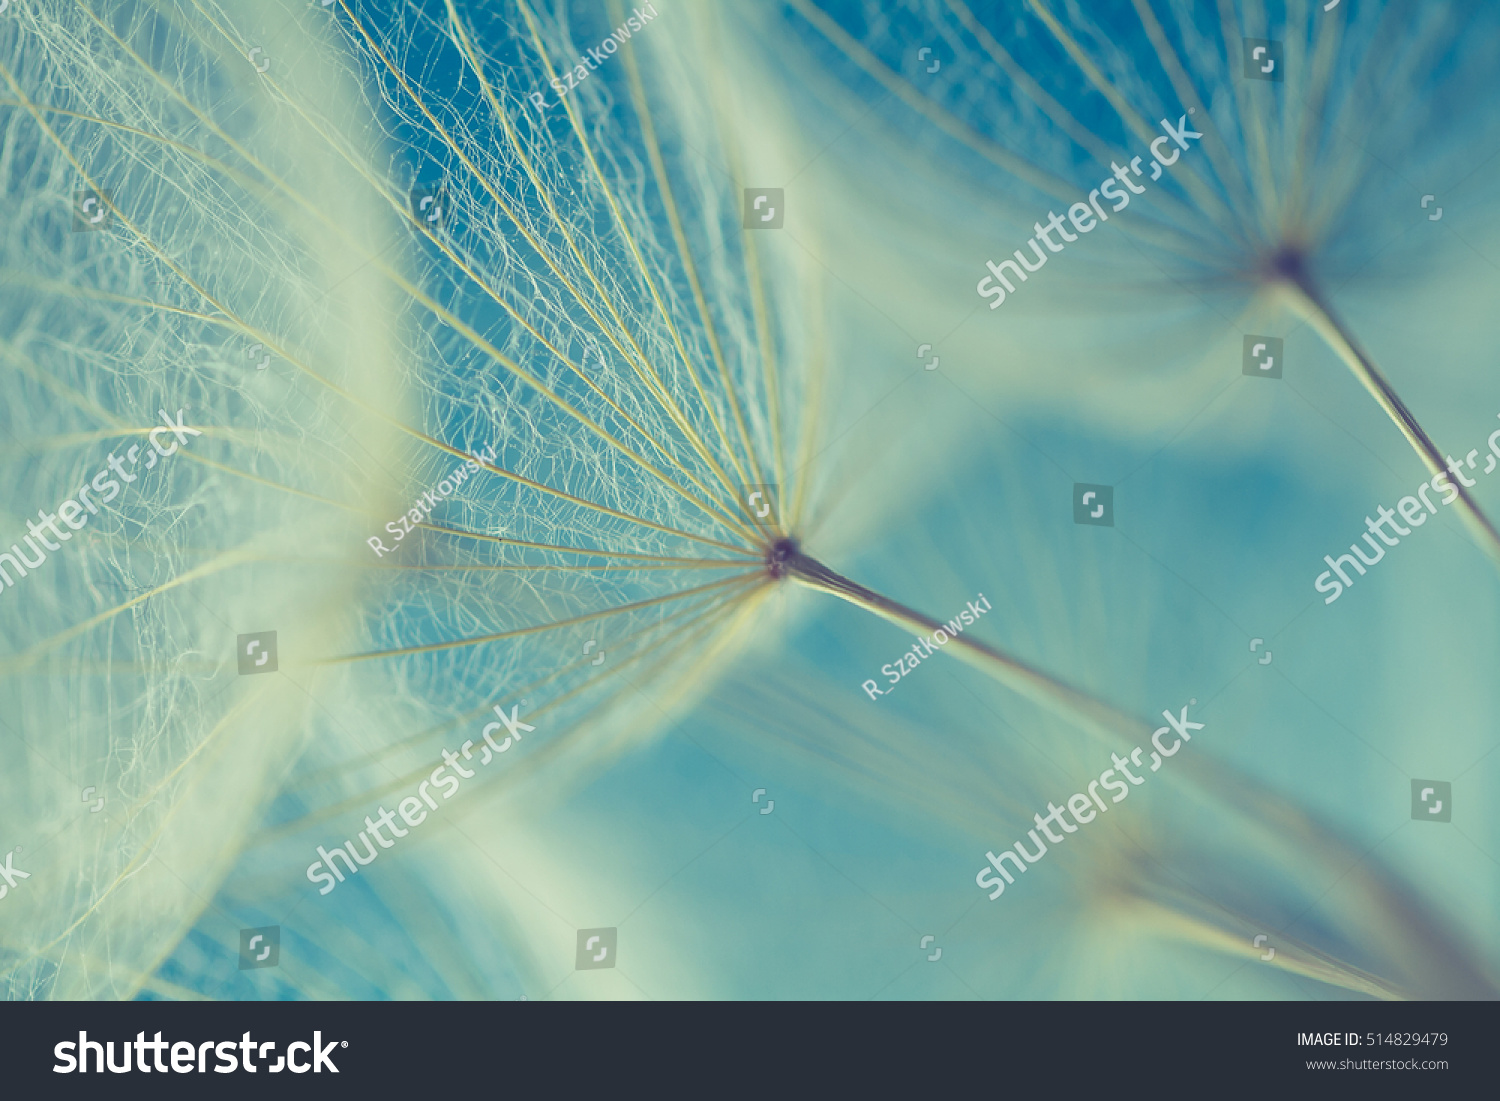 Abstract dandelion flower background, extreme closeup. Big dandelion on natural background. Art photography  #514829479